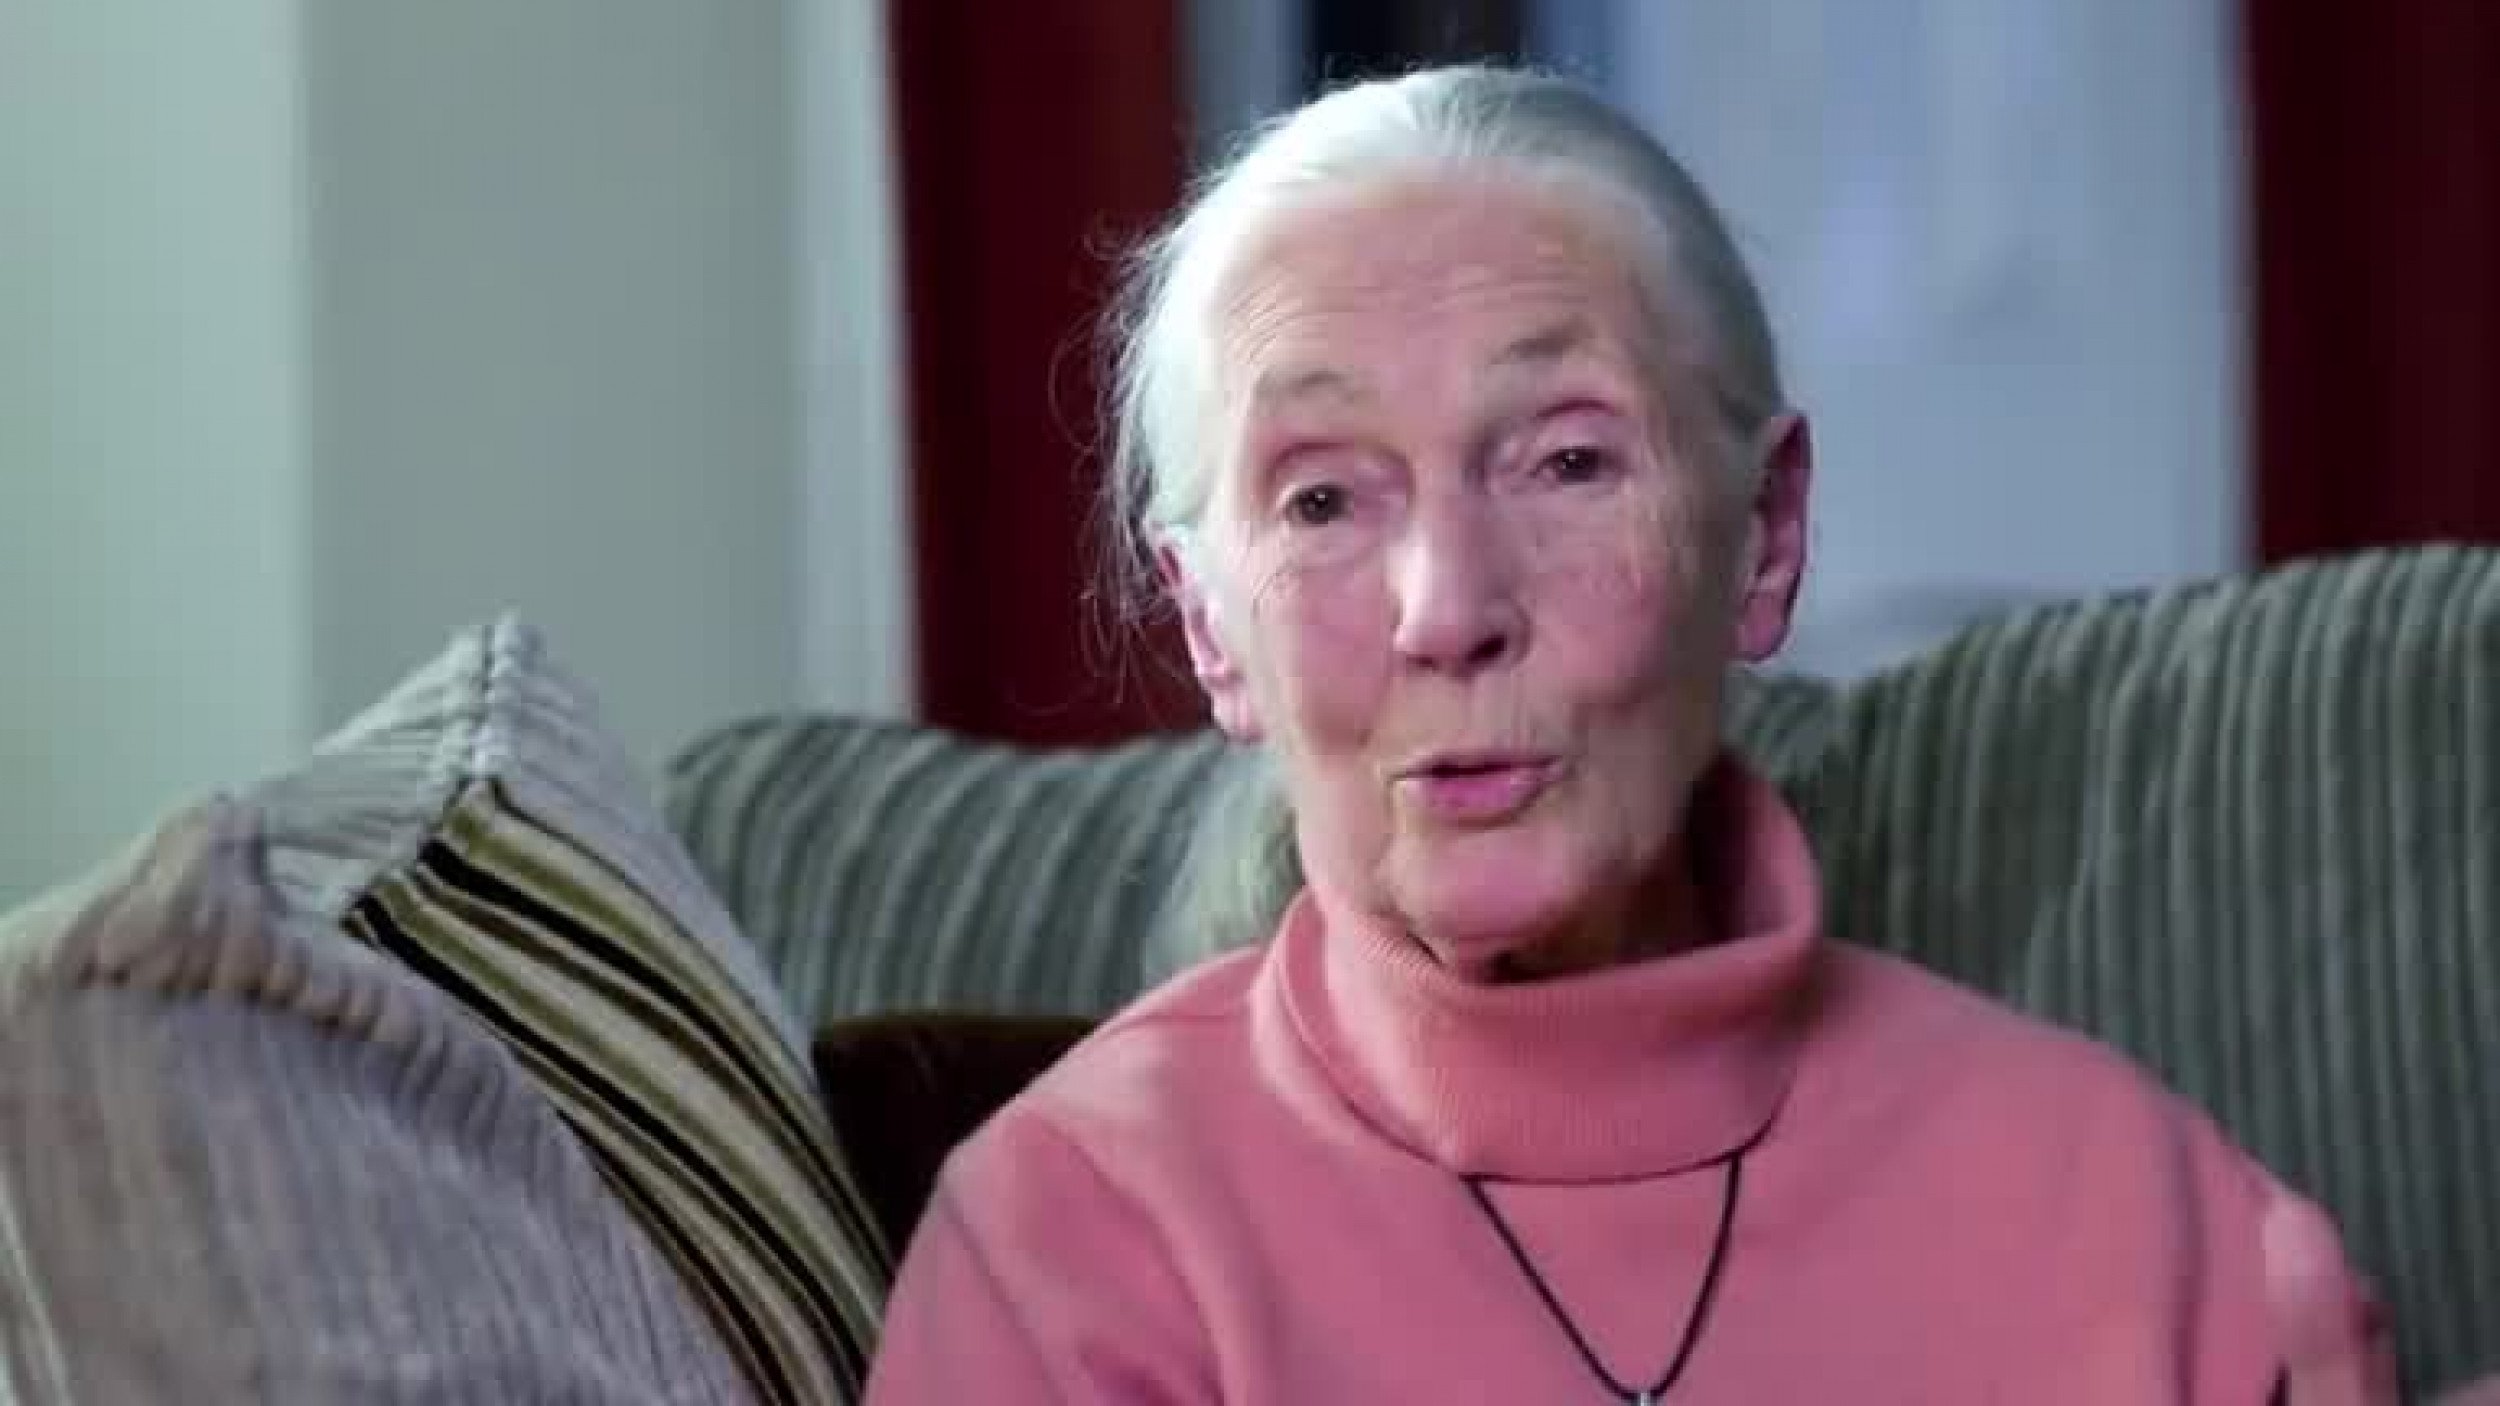 Jane Goodall The Hope  Trailer  National Geographic